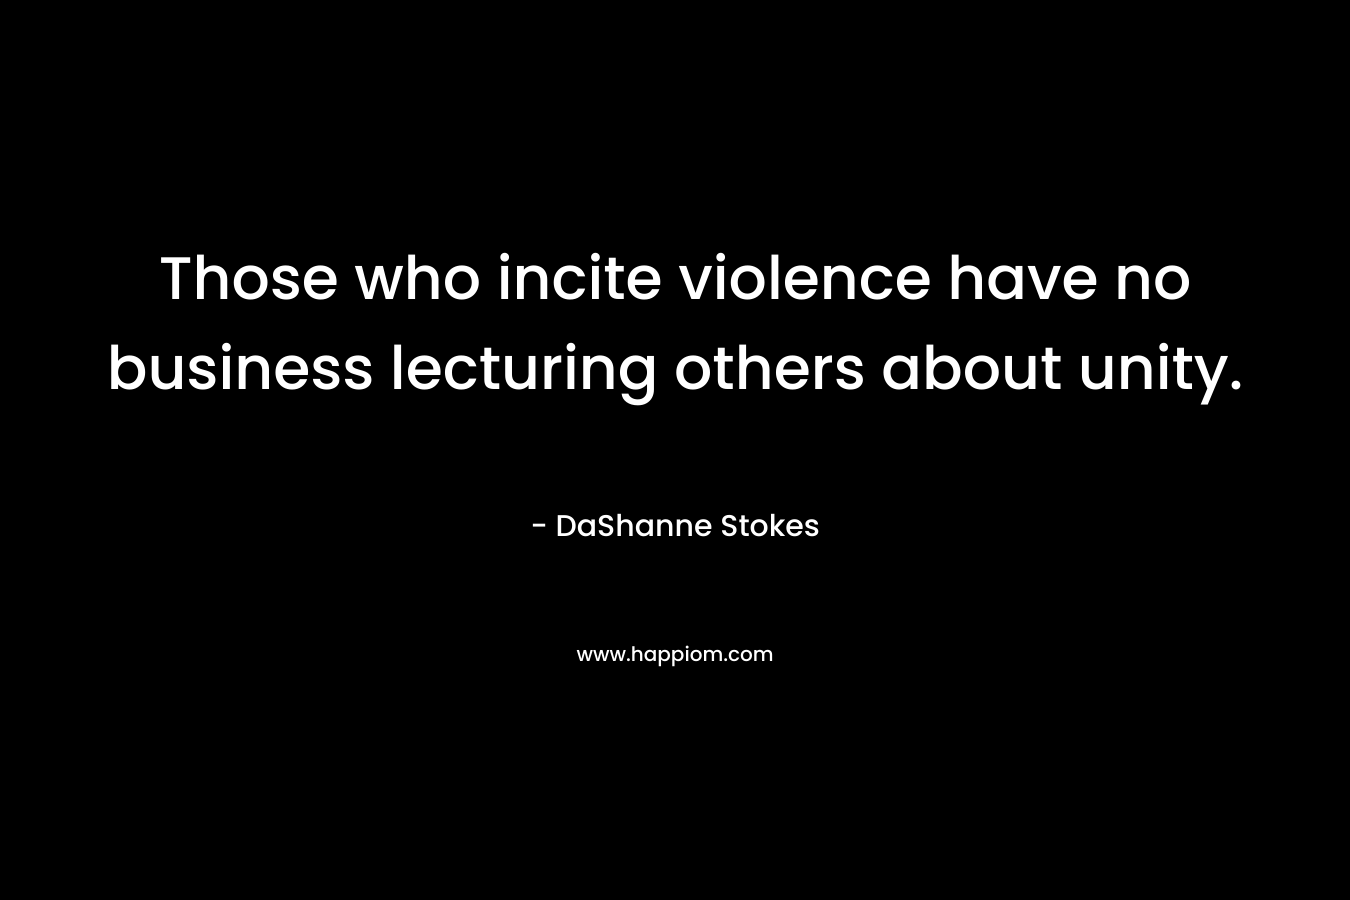 Those who incite violence have no business lecturing others about unity.